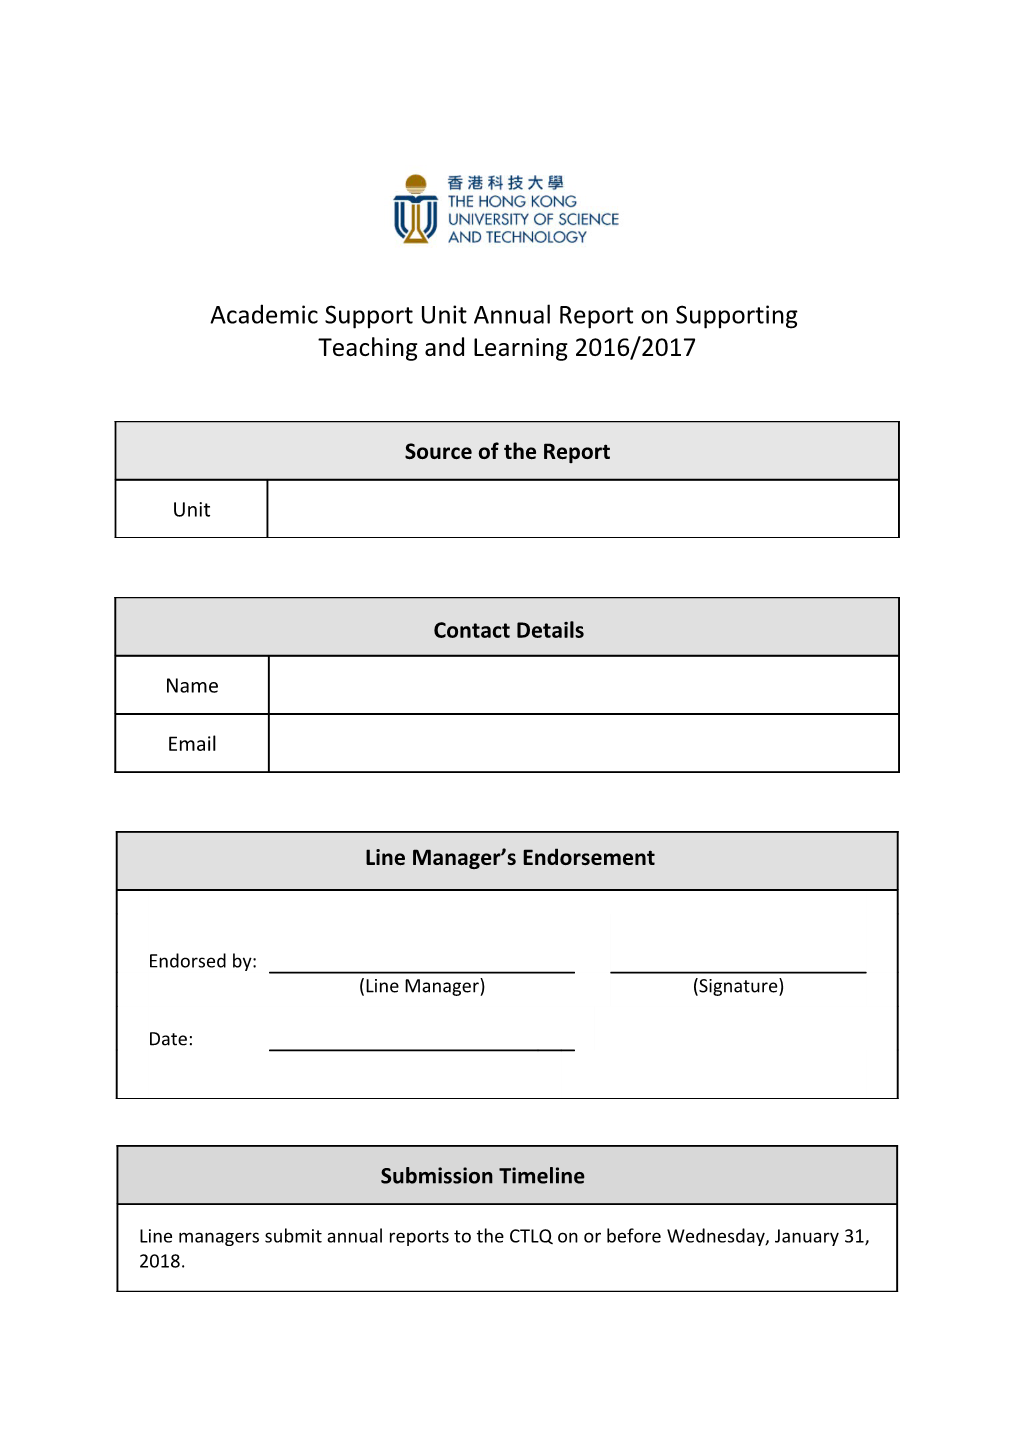 Academic Support Unit Annual Report on Supporting